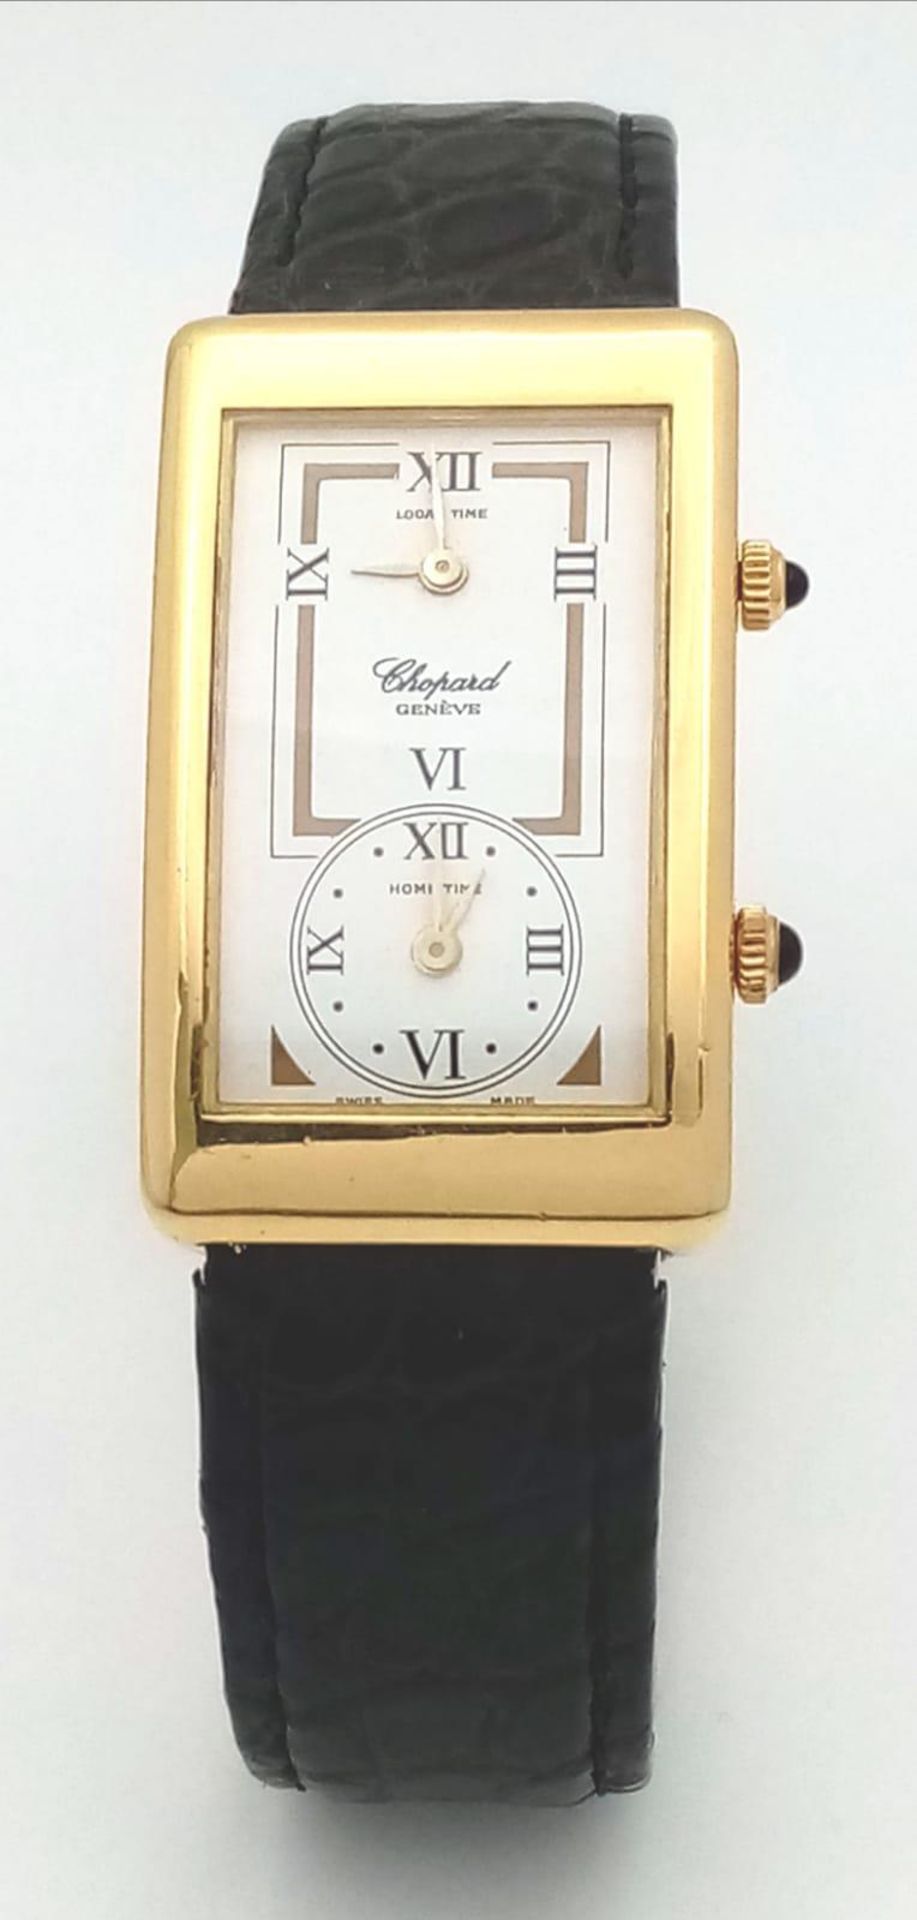 A Chopard 18K Gold Home Time (Dual Time) Gents Watch. Black leather strap. 18K gold rectangular case